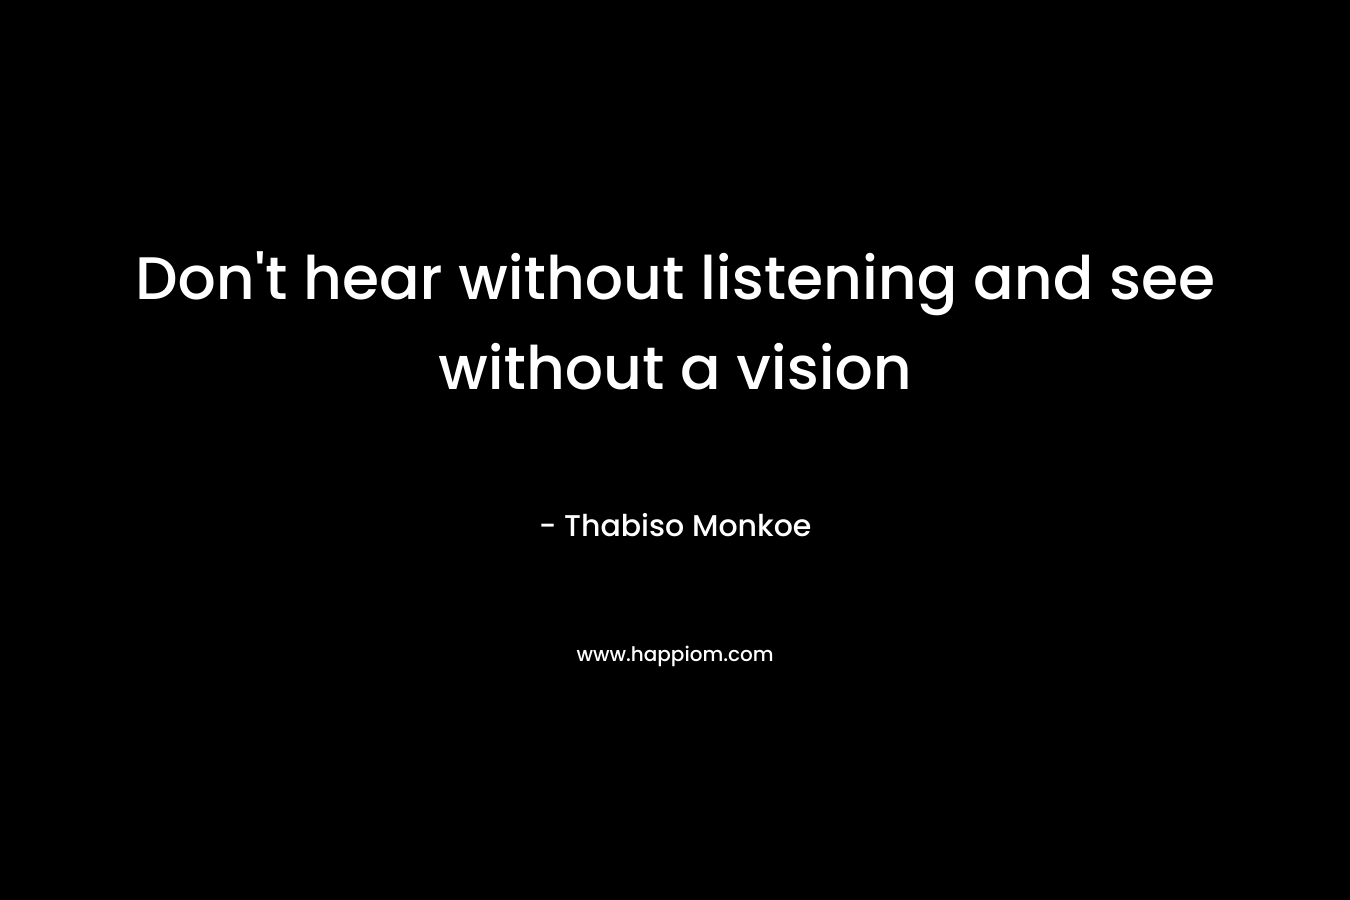 Don't hear without listening and see without a vision